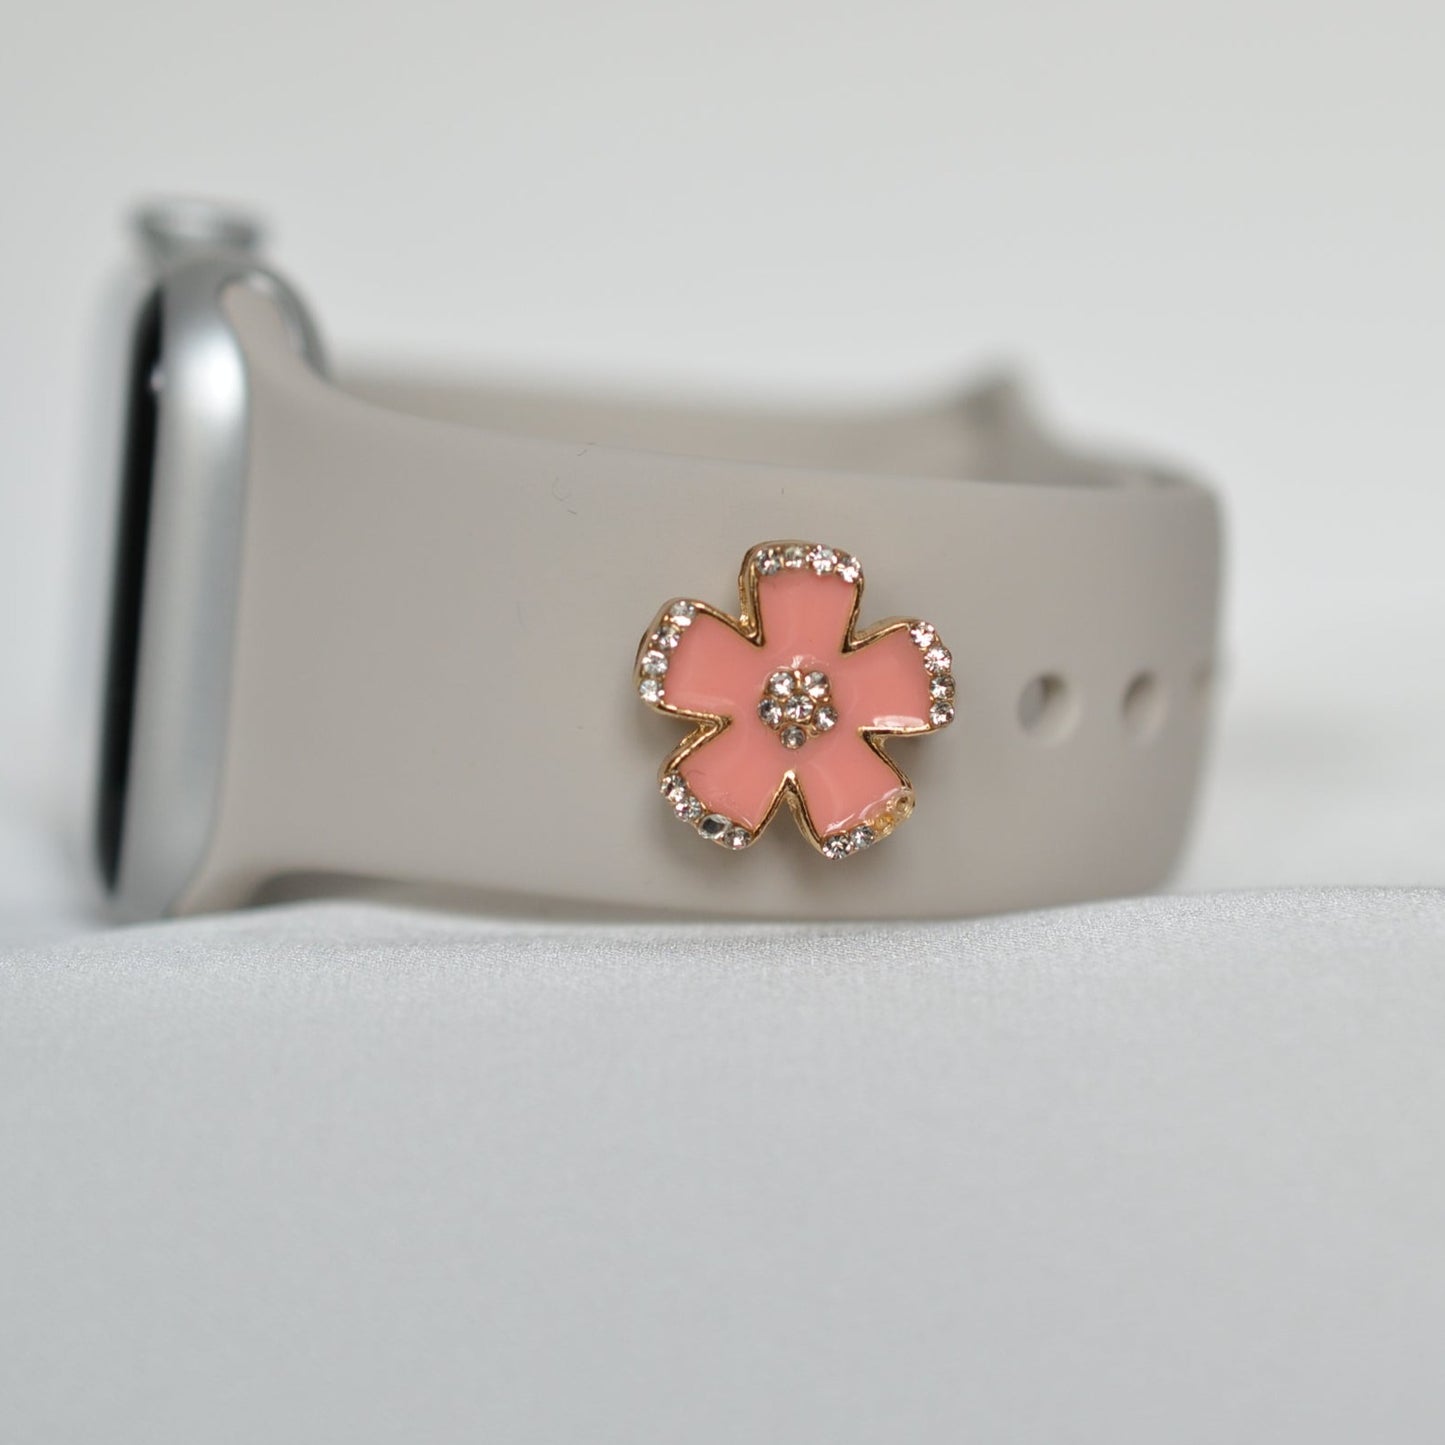 Light Orange - Pink Flower Charm for Belts, Bags and Watch Bands